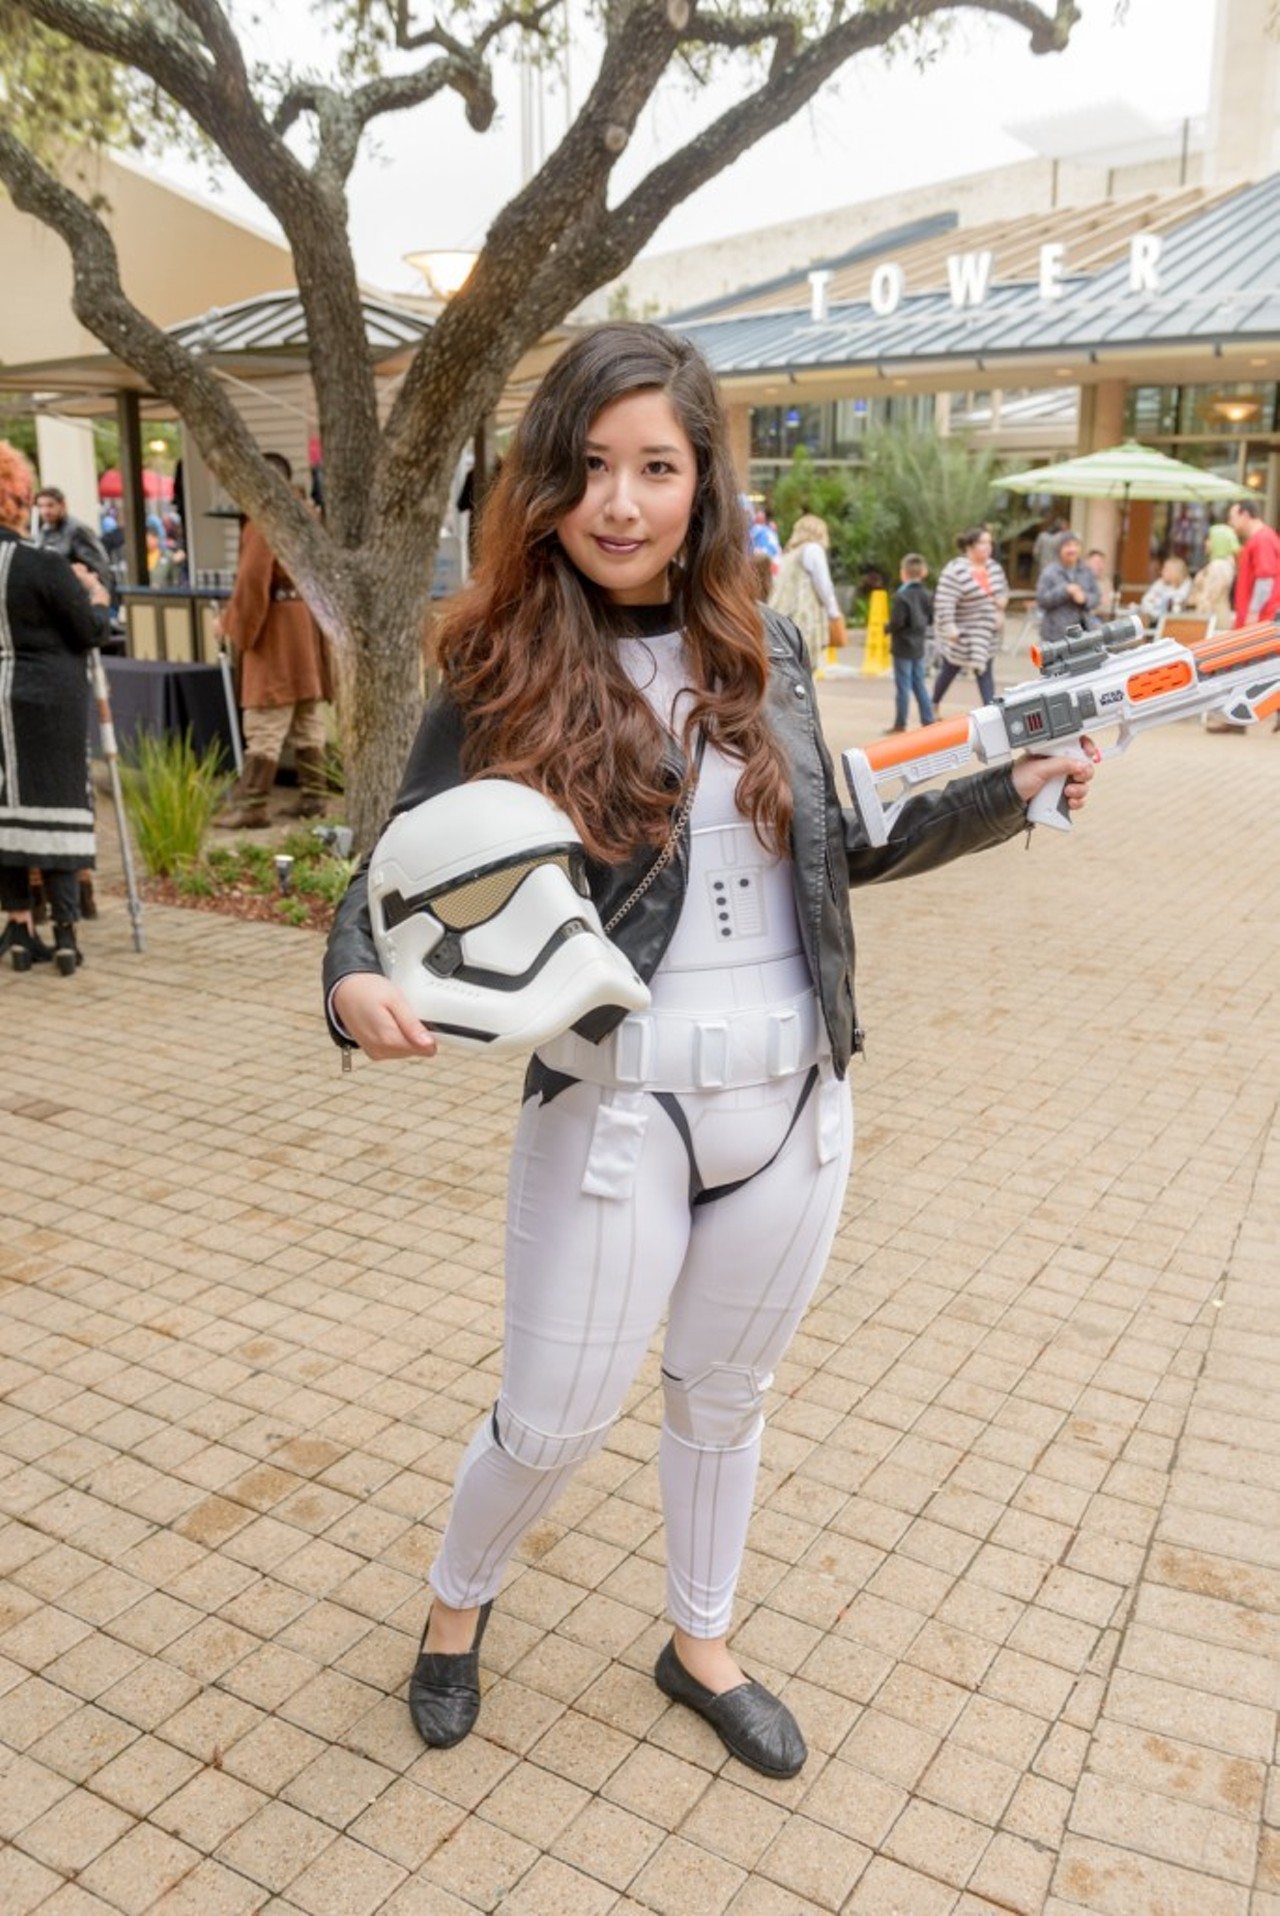 The Best Moments from the San Antonio Wookiee Walk 2016